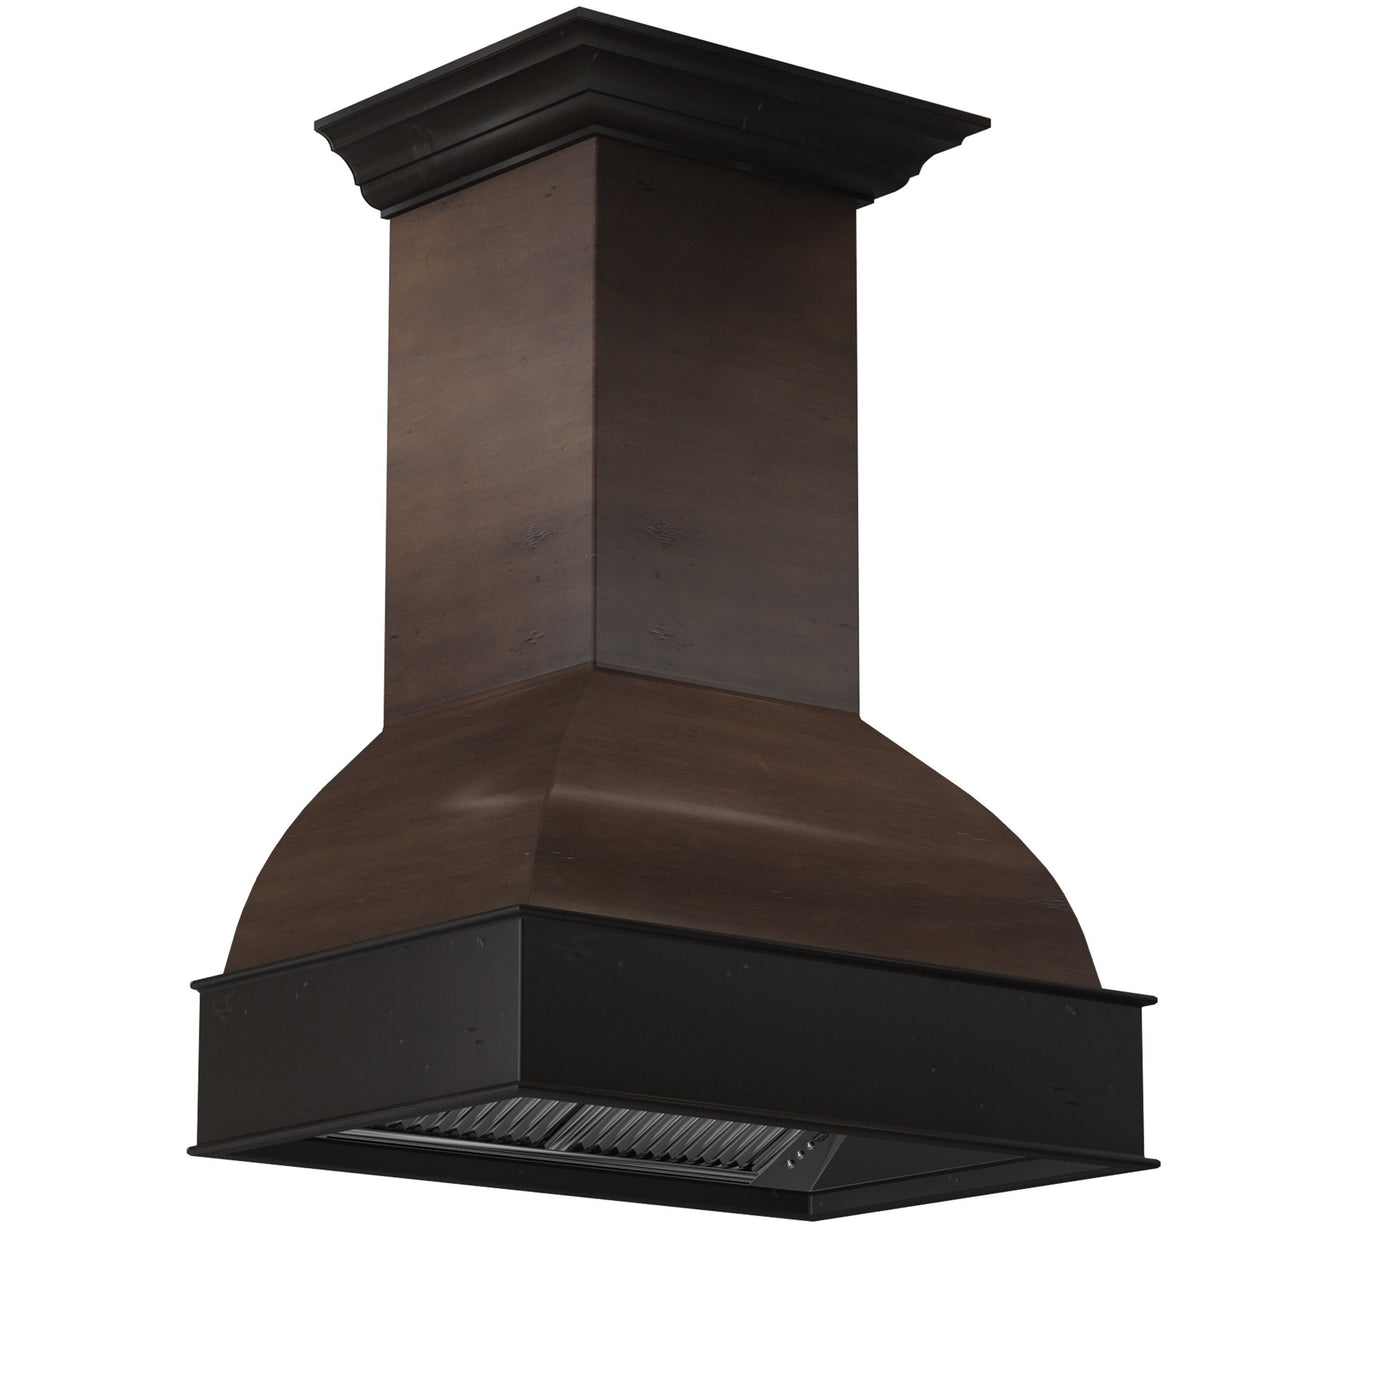 ZLINE 36 in. Wooden Wall Mount Range Hood in Antigua and Walnut - Includes  Remote Motor